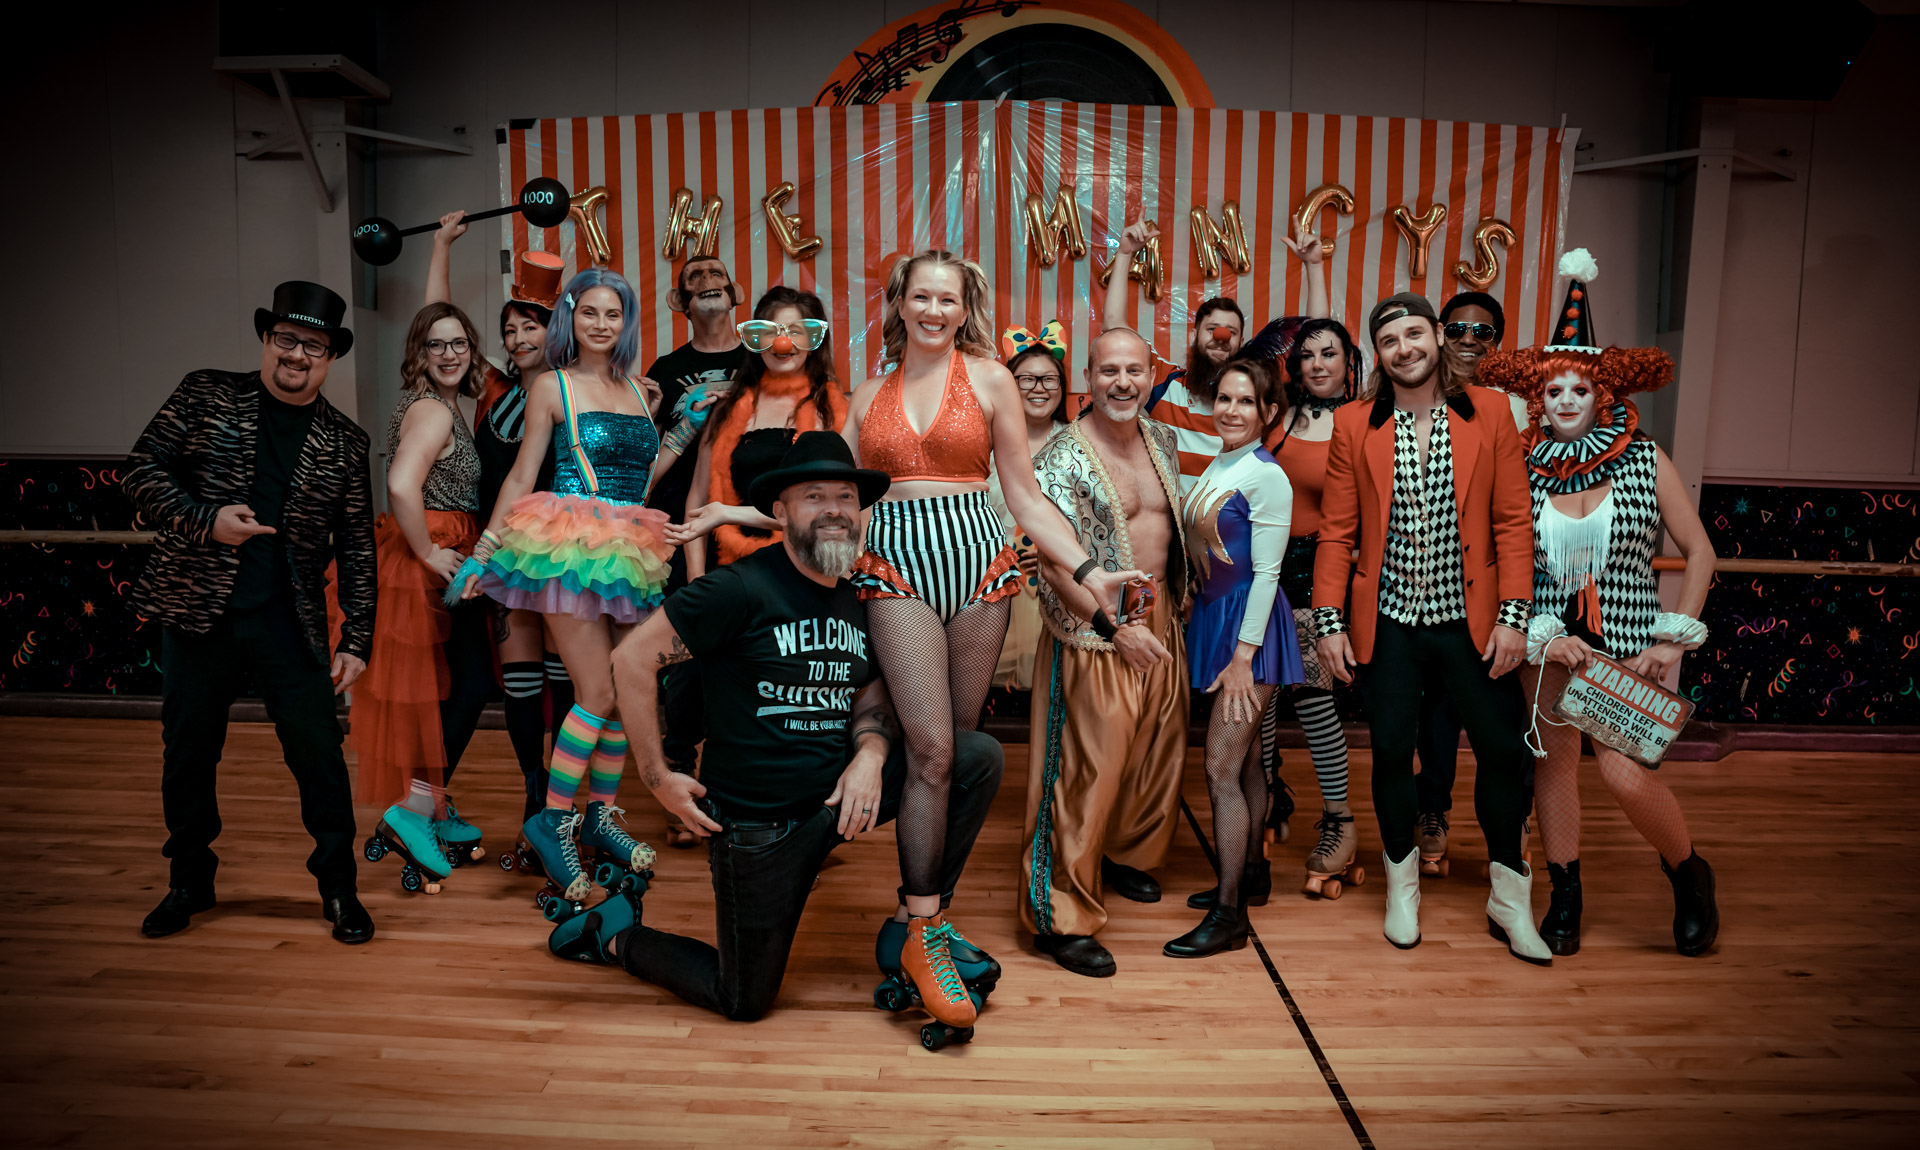 group circus costumes